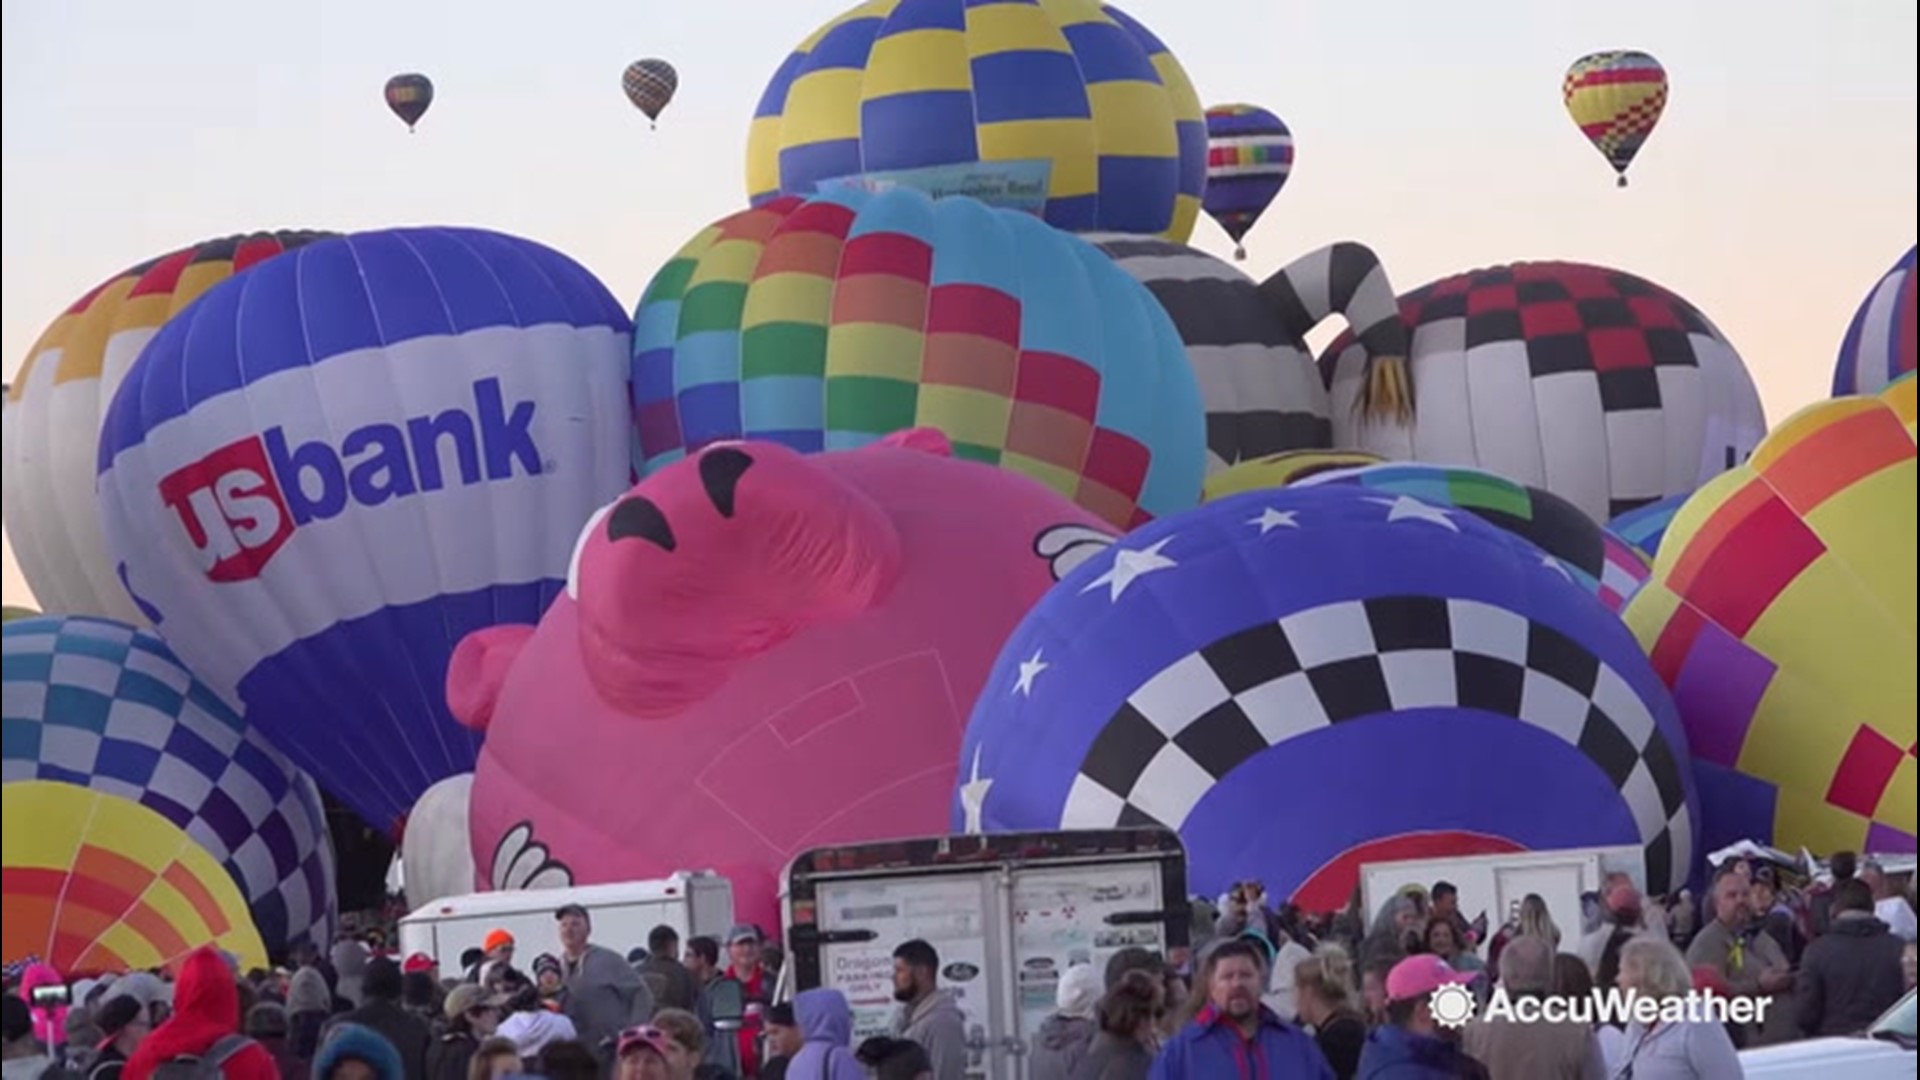 Things seem to be going well on the second day of the 2019 Albuquerque International Balloon Fiesta on Sunday, Oct. 6, in Albuquerque, New Mexico.